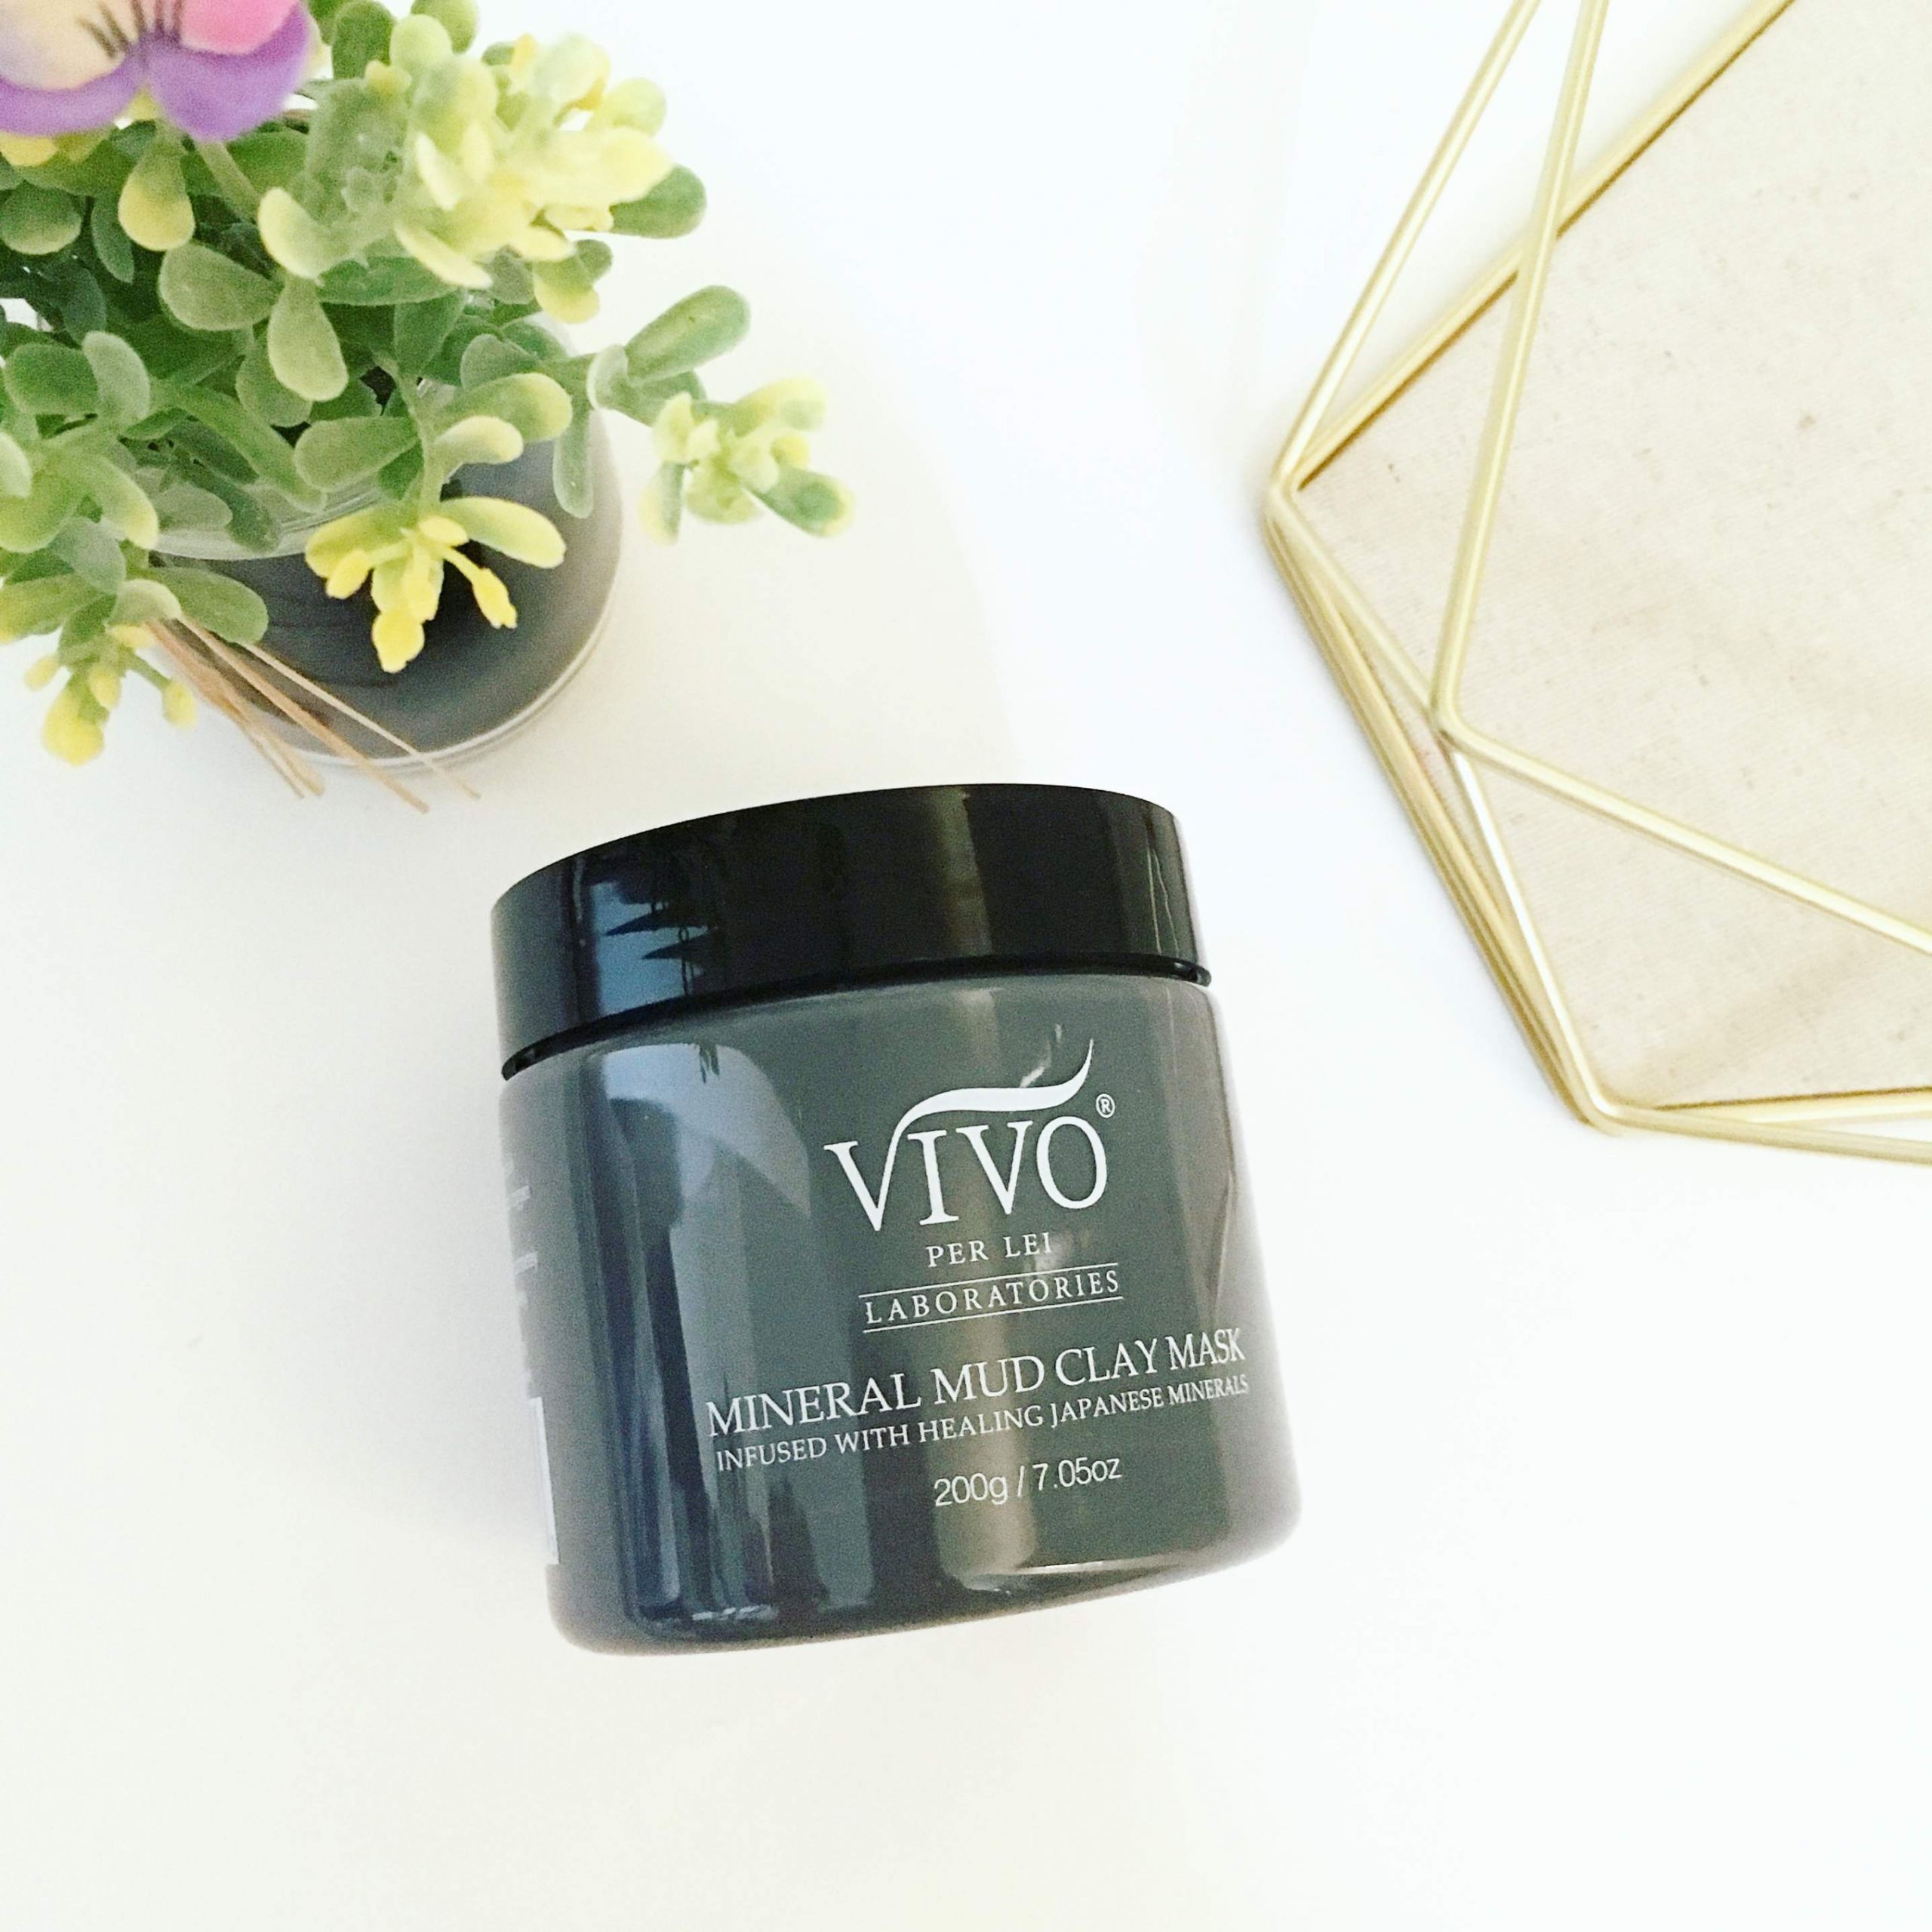 vivo per lei mineral mud clay mask product review tur unter treppe tur unter treppe